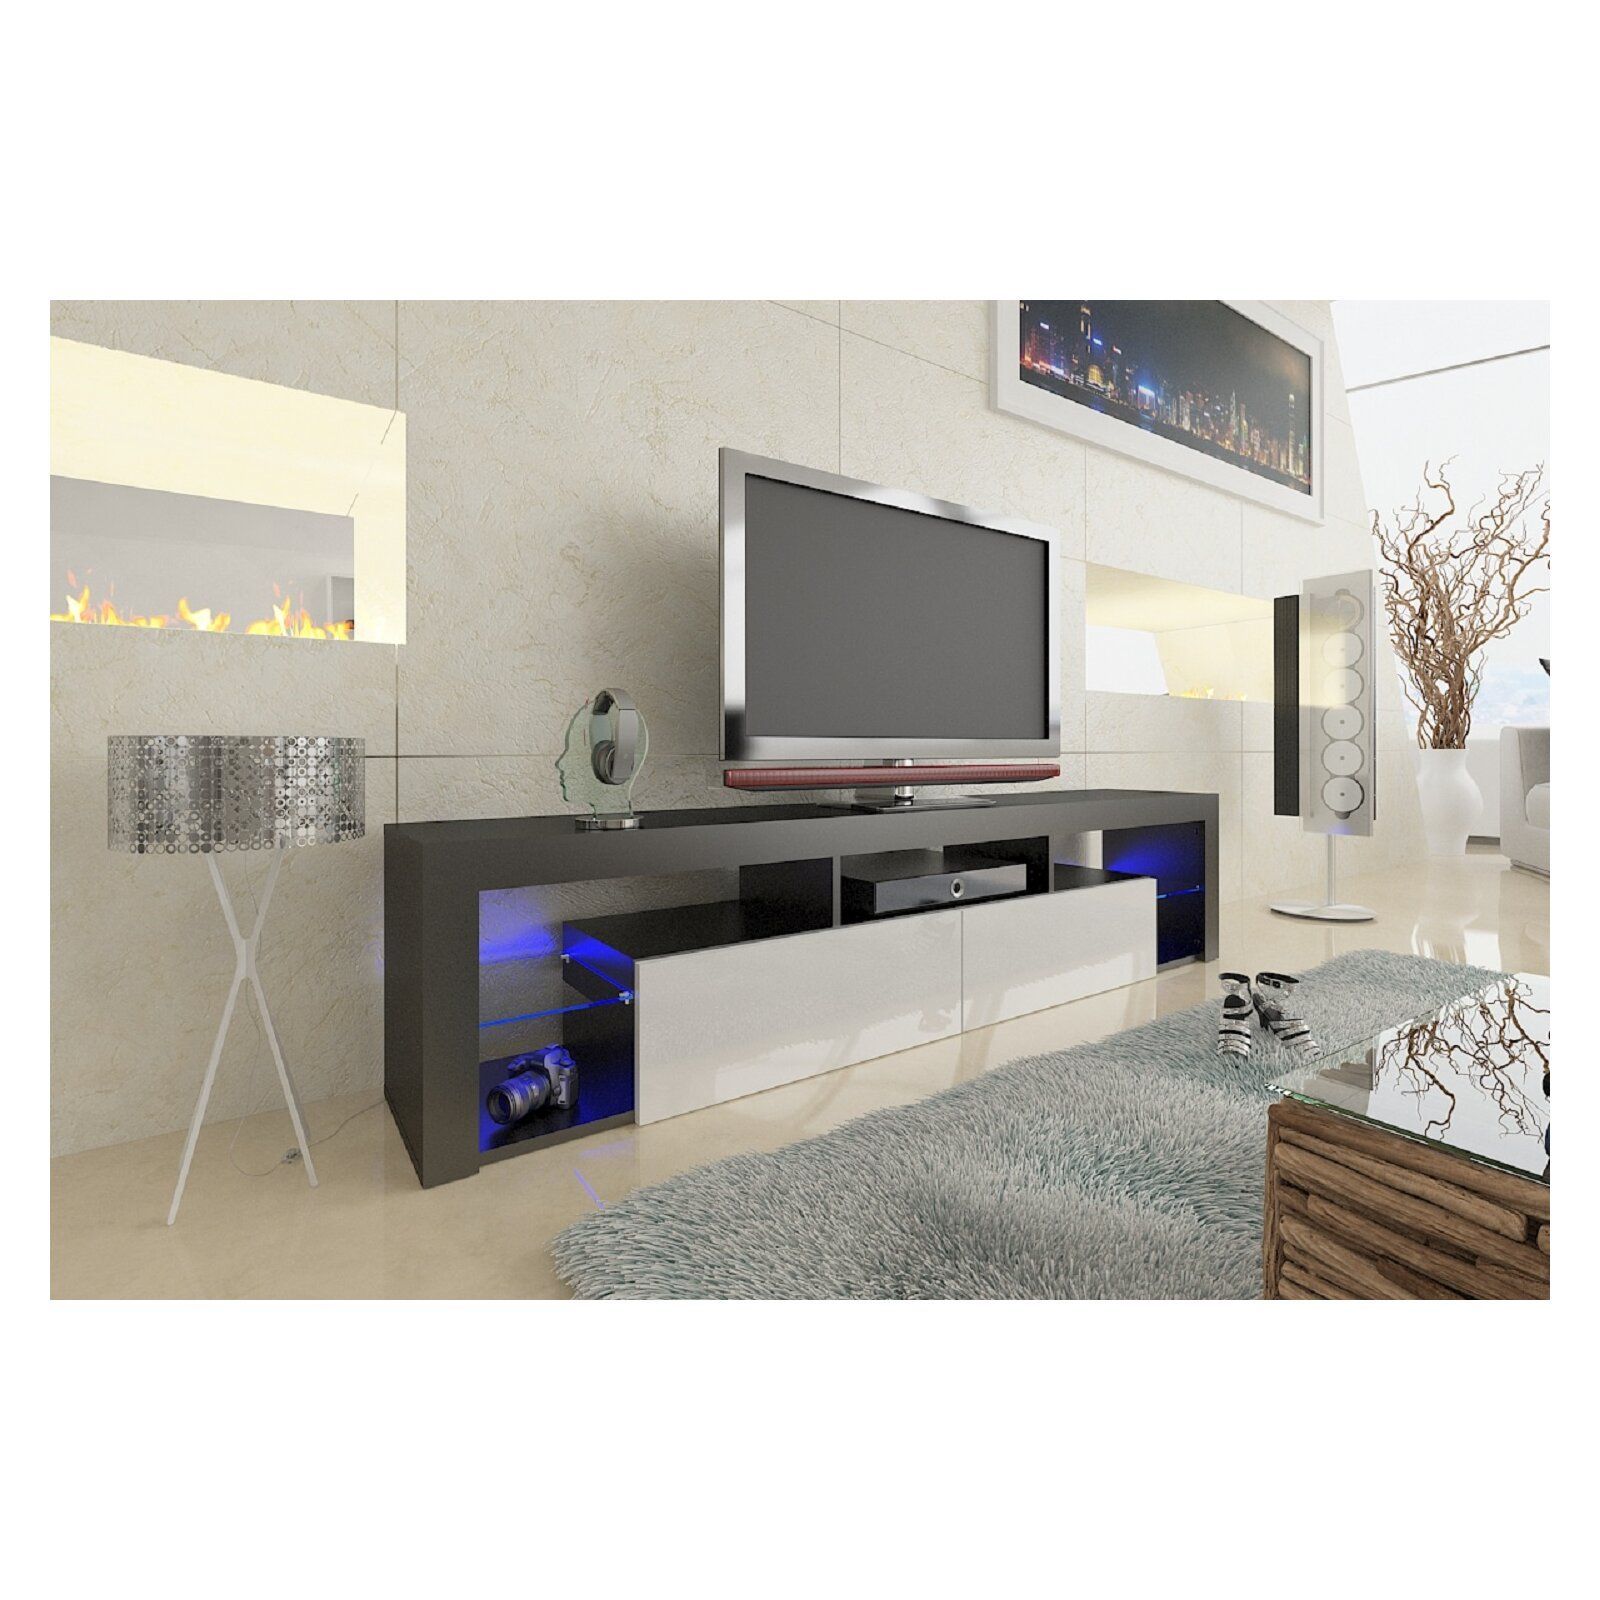 Floating Milano Tv Stand For Tvs Up To 90" | Living Room Regarding Milano Tv Stands (View 5 of 15)